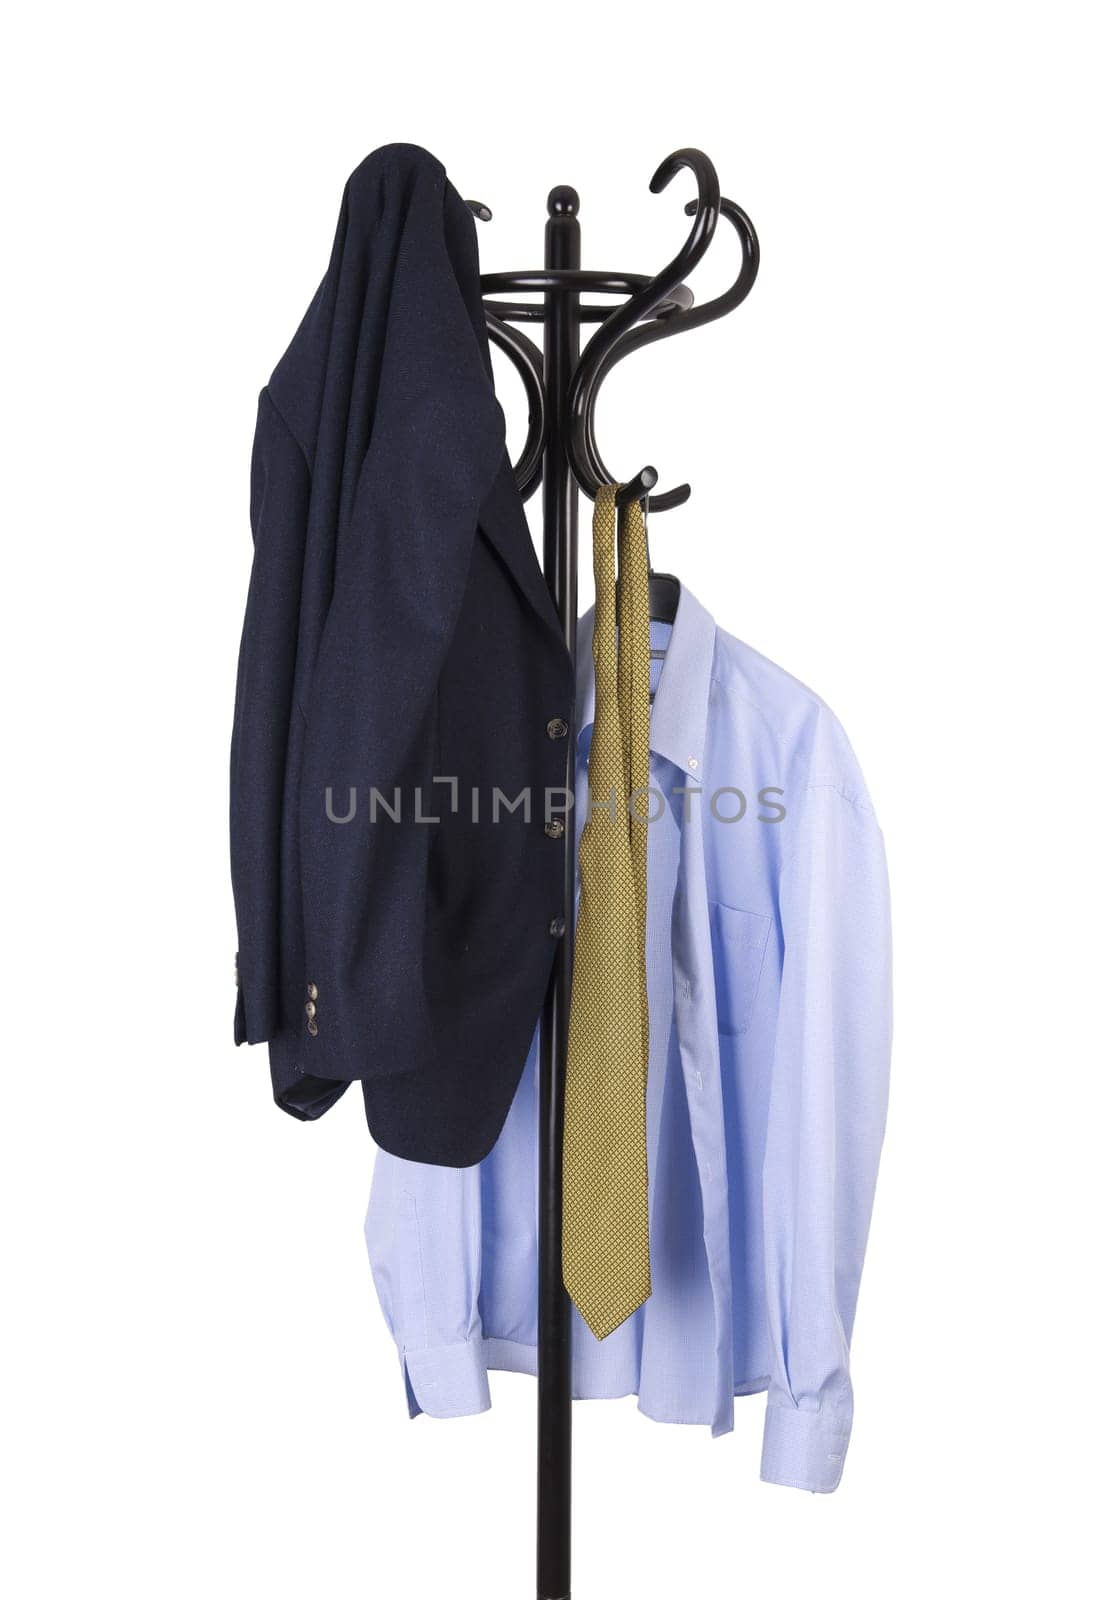 a coat rack with a men's jacket, shirt and tie on a transparent background